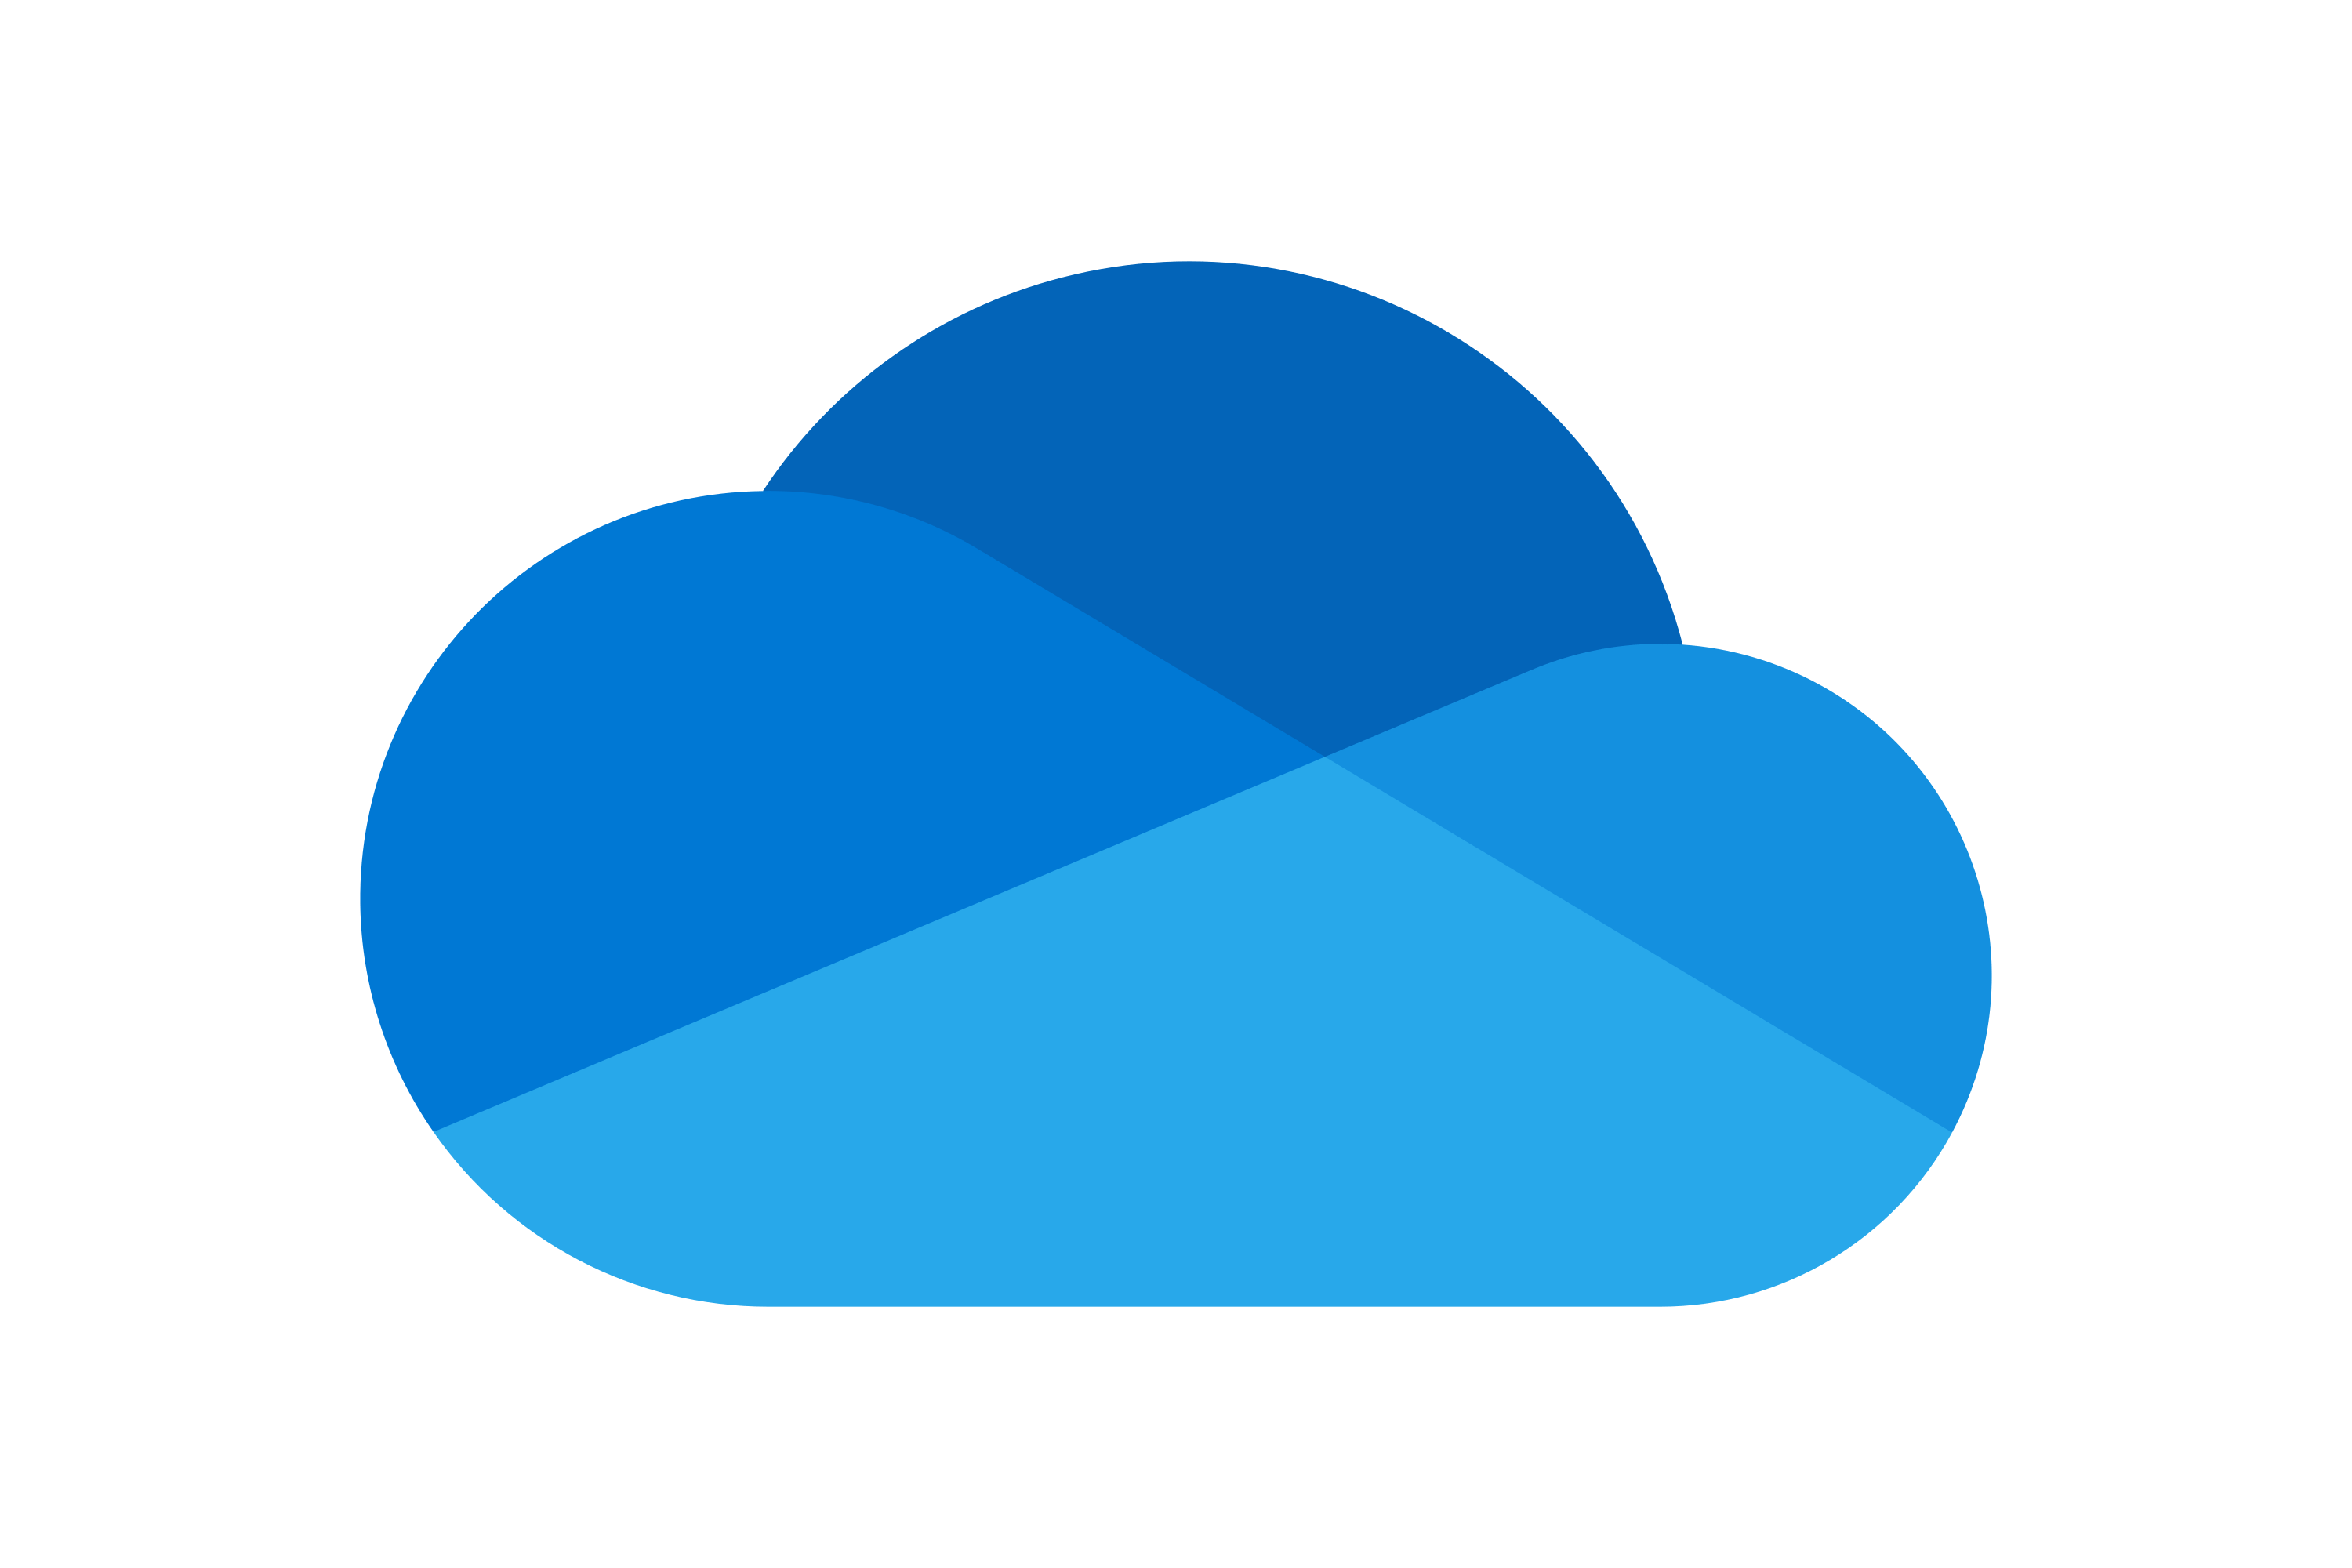 download onedrive log in